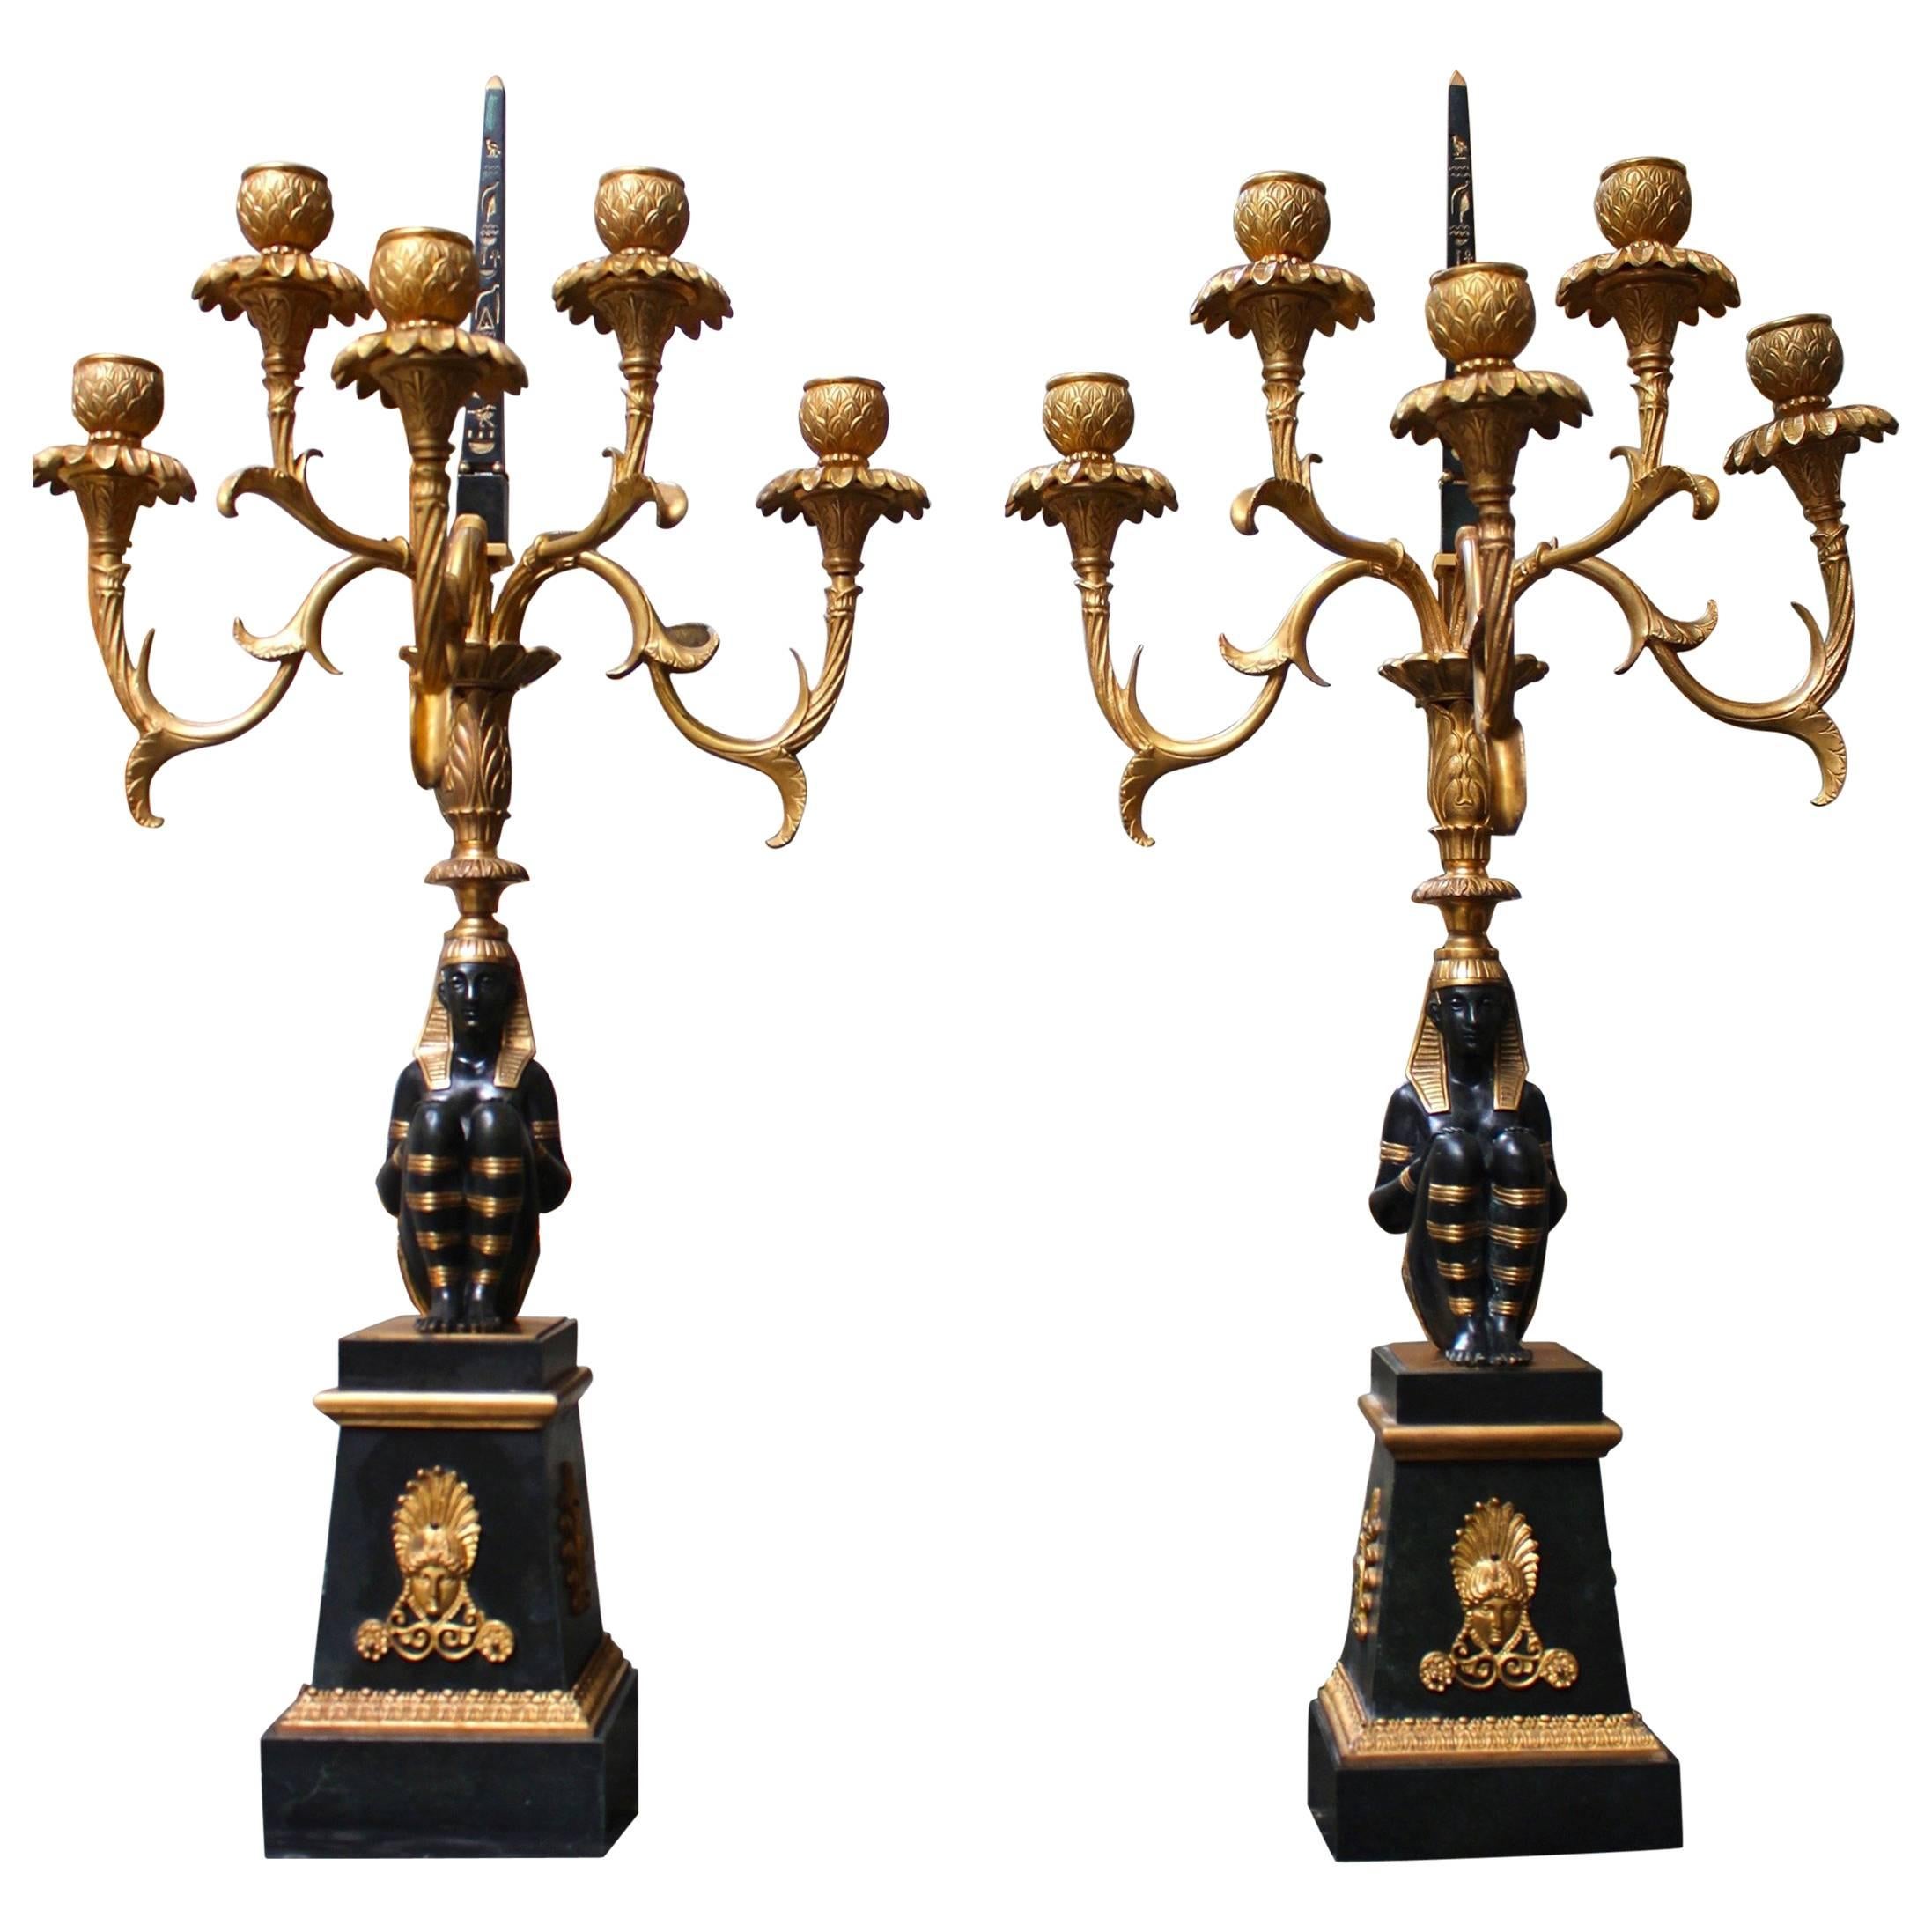 Pair of French Egyptian Revival First Empire Style Candelabras